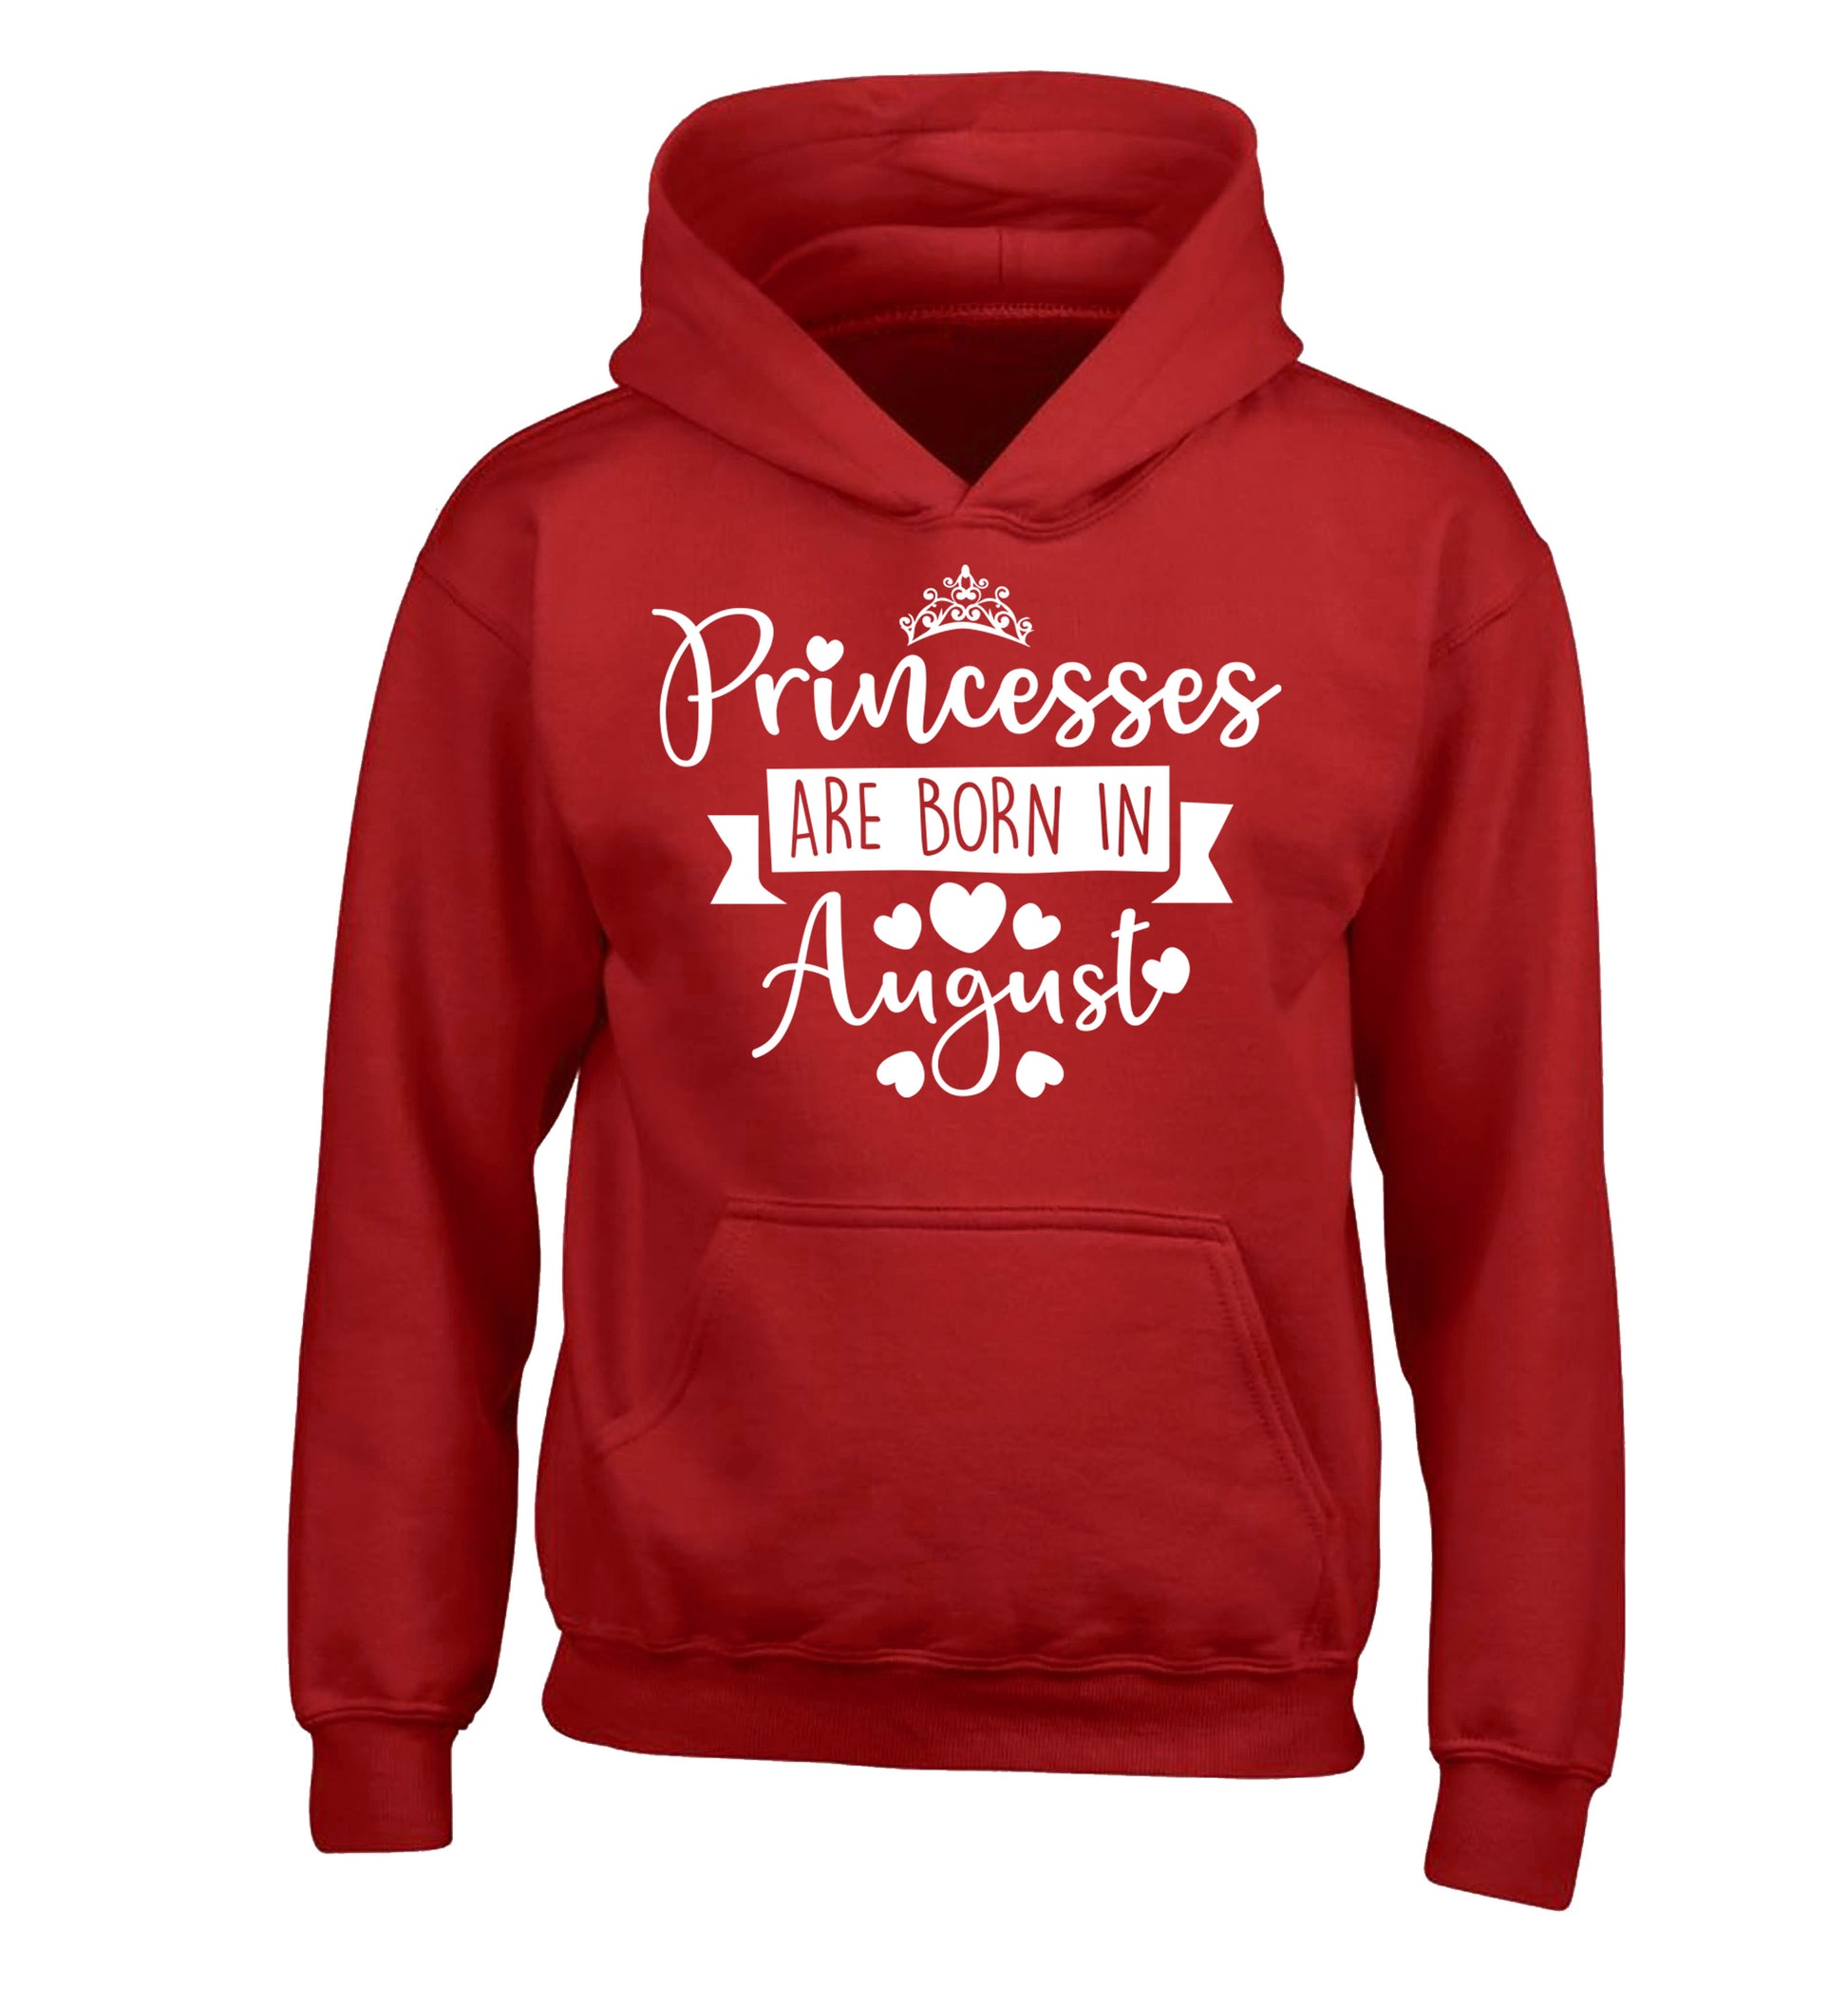 Princesses are born in August children's red hoodie 12-13 Years